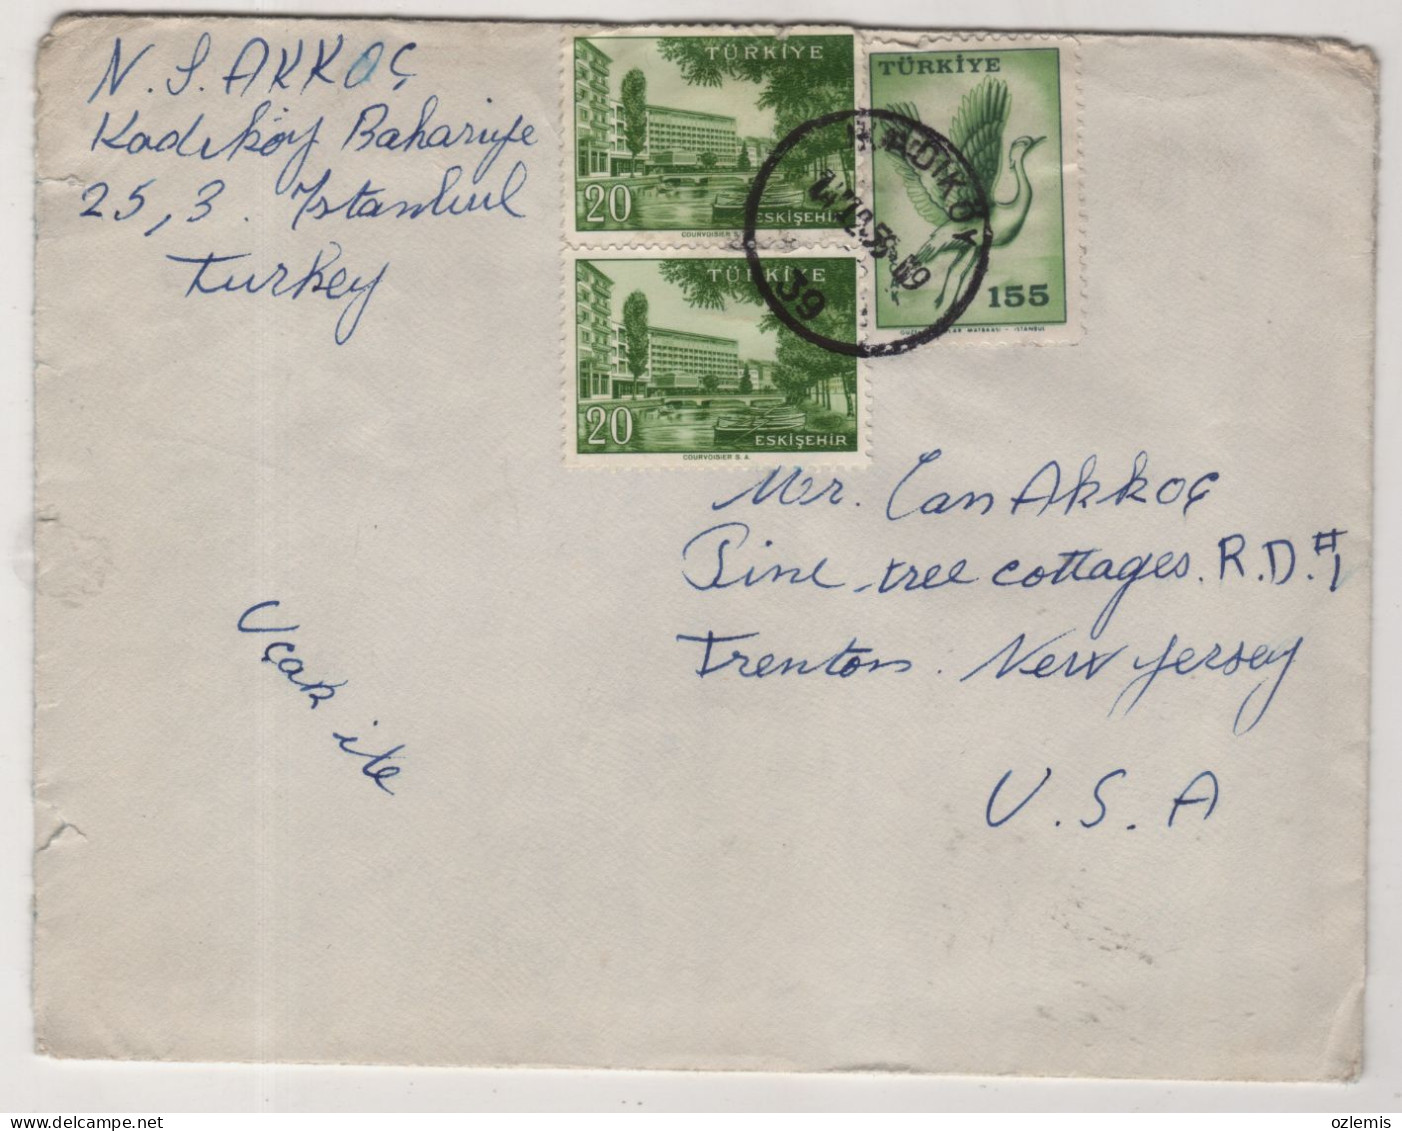 TURKEY,TURKEI,TURQUIE ,ISTANBUL TO USA.NEW JERSEY, ,1959 COVER - Covers & Documents